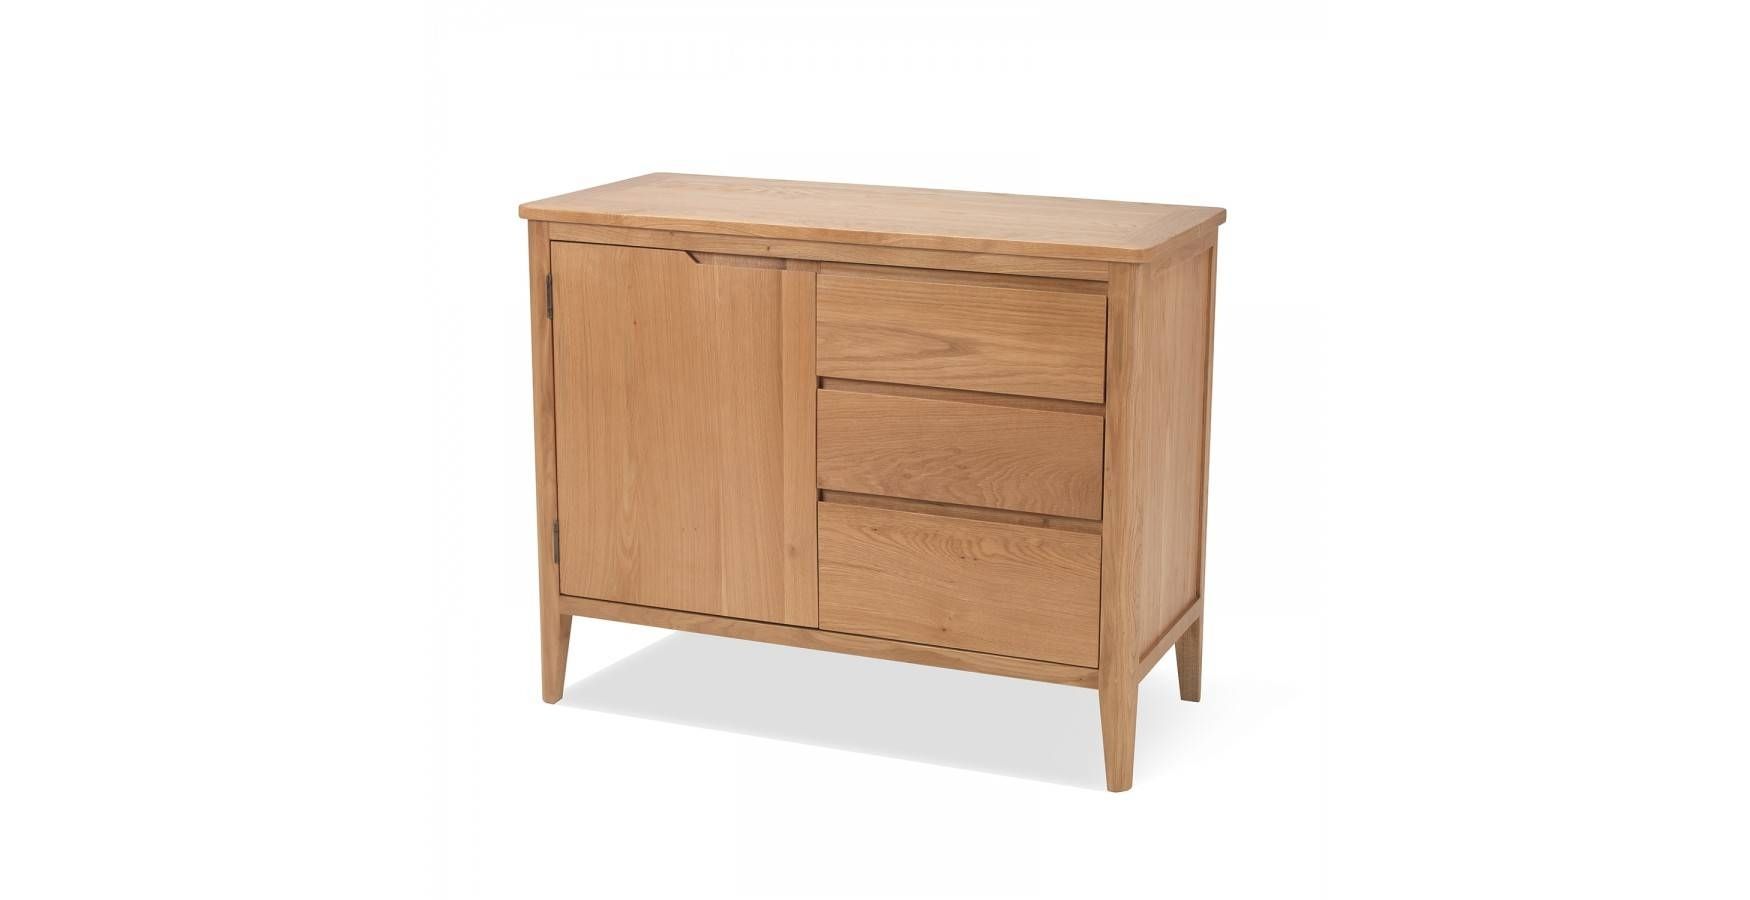 Cadley Oak Small Sideboard With Drawers – Lifestyle Furniture Uk Regarding Small Sideboard (View 2 of 20)